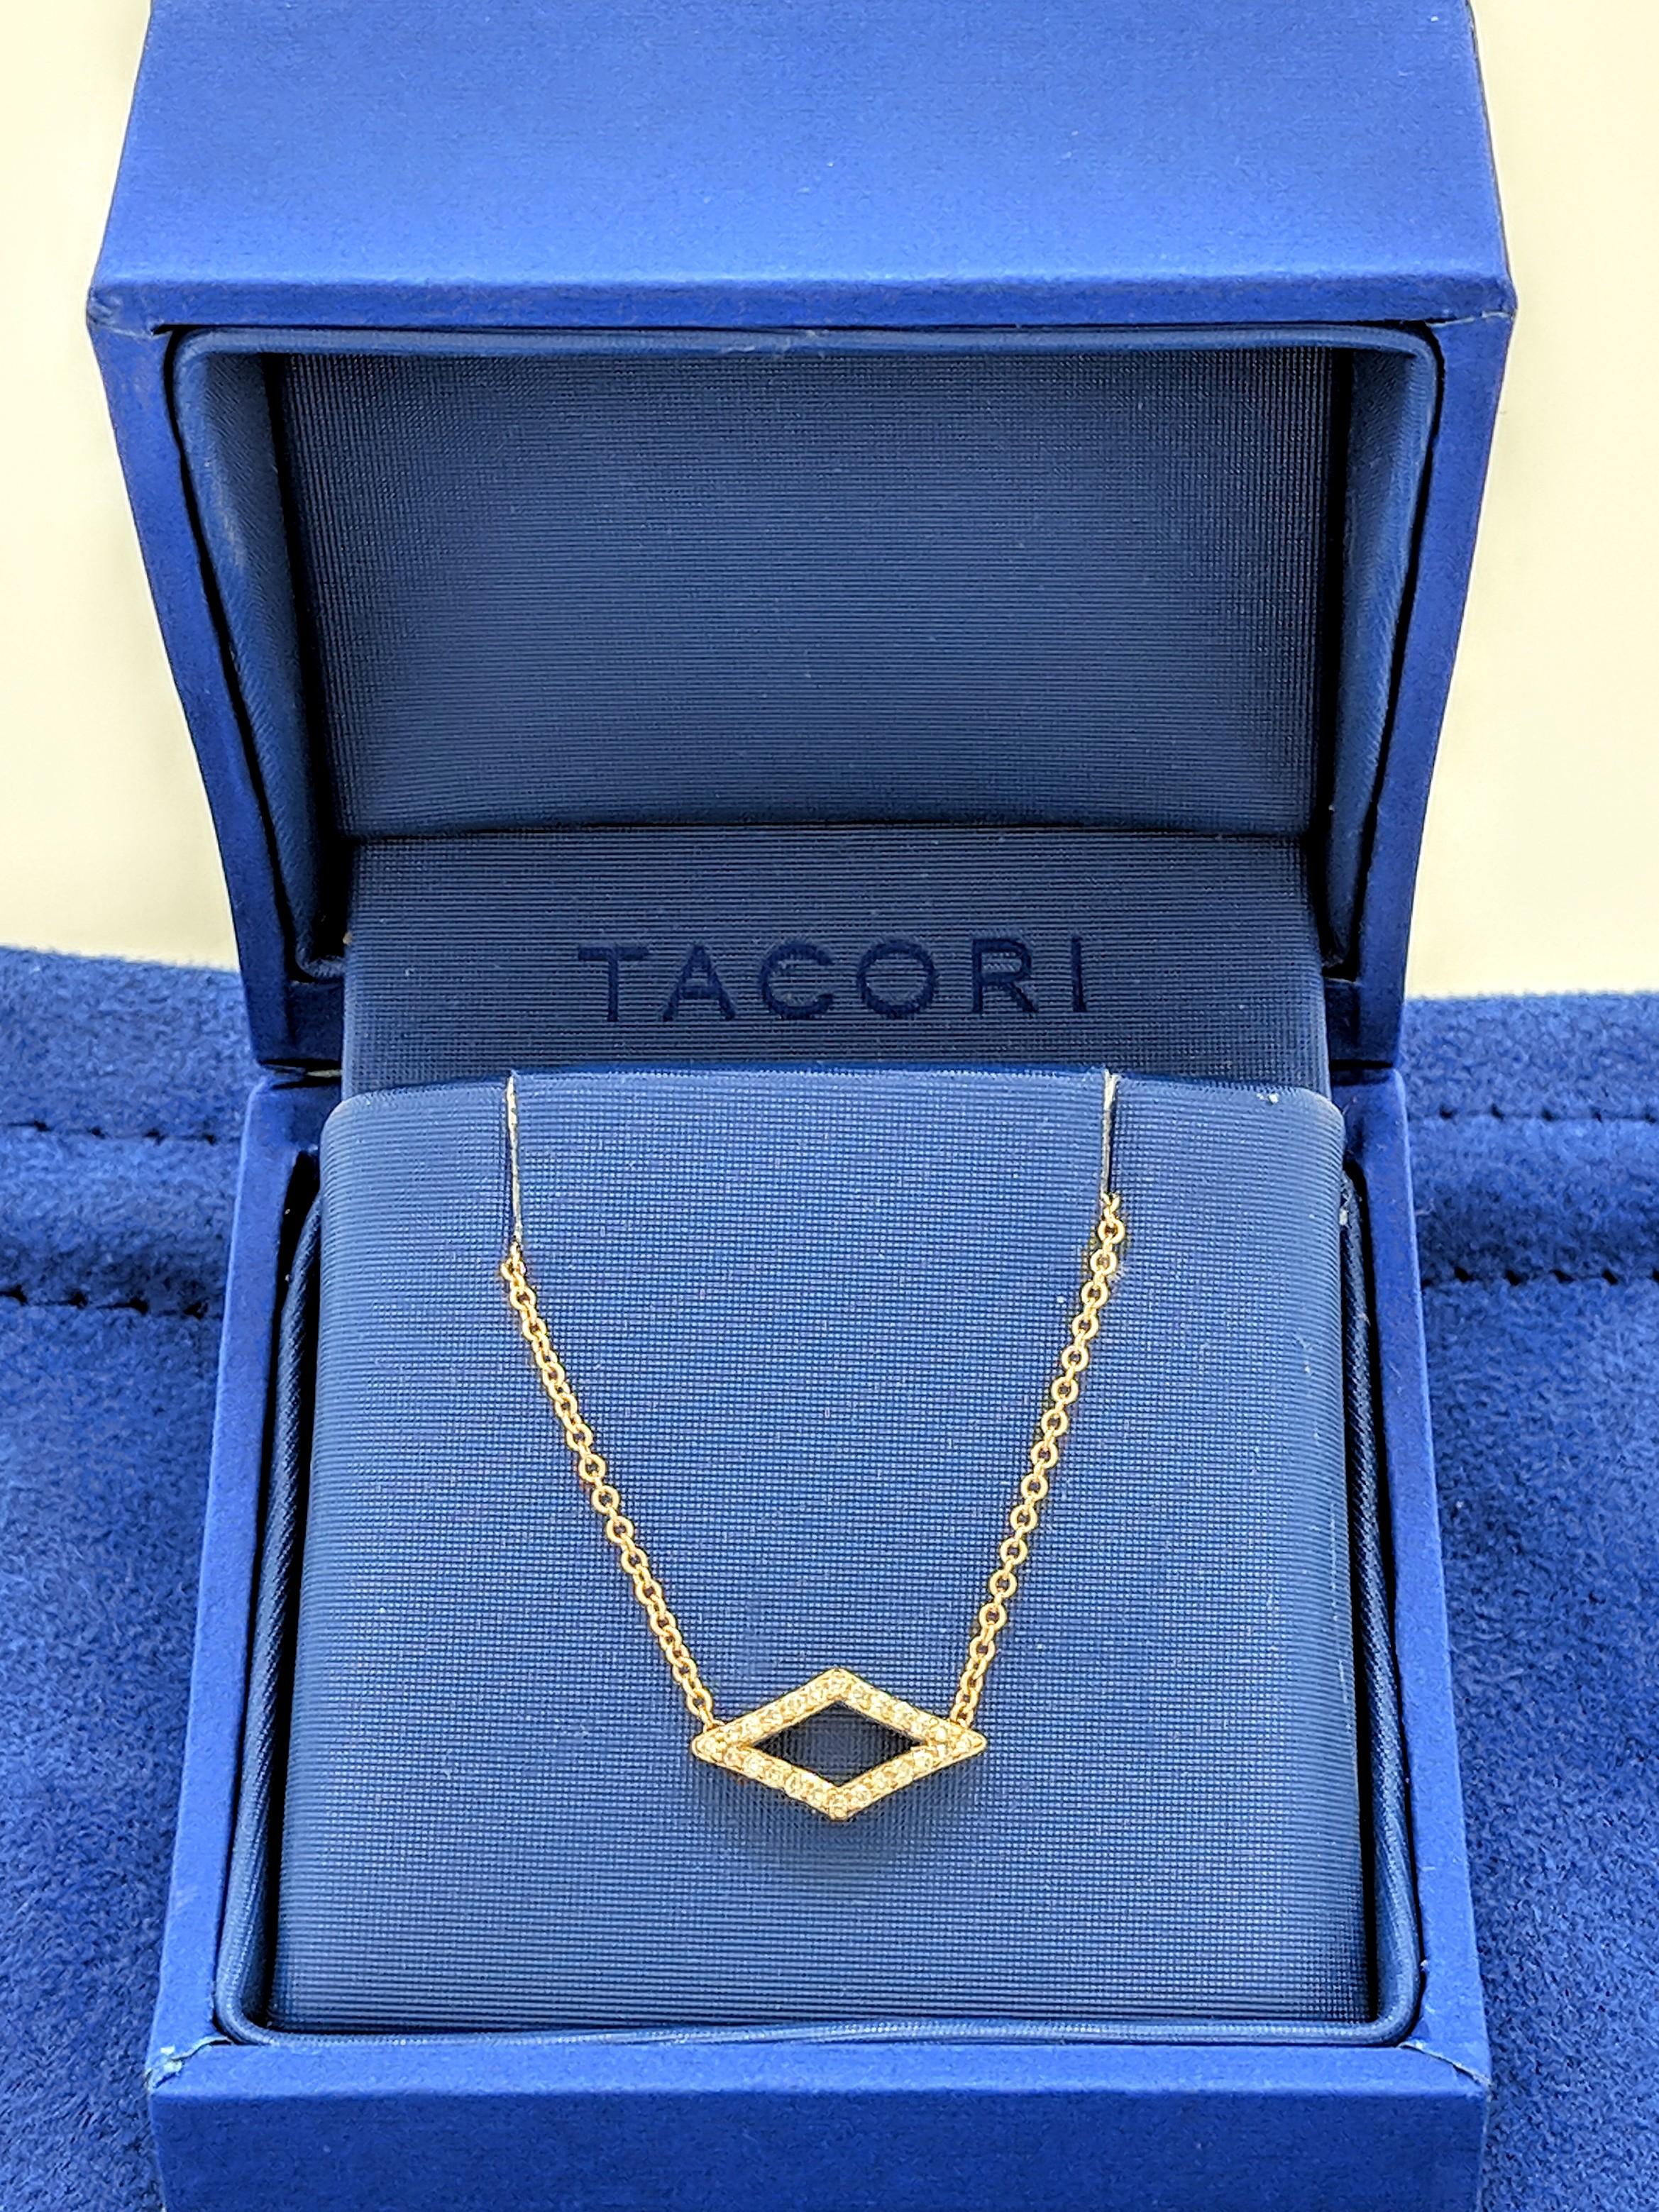 You are viewing a Beautiful Tacori Ivy Lane Pave Diamond Chevron Pendant Necklace.

The necklace is crafted from 18k yellow gold and weighs 2.9 grams. It features (24) natural round brilliant cut diamonds for an estimated .09tcw. The diamonds range